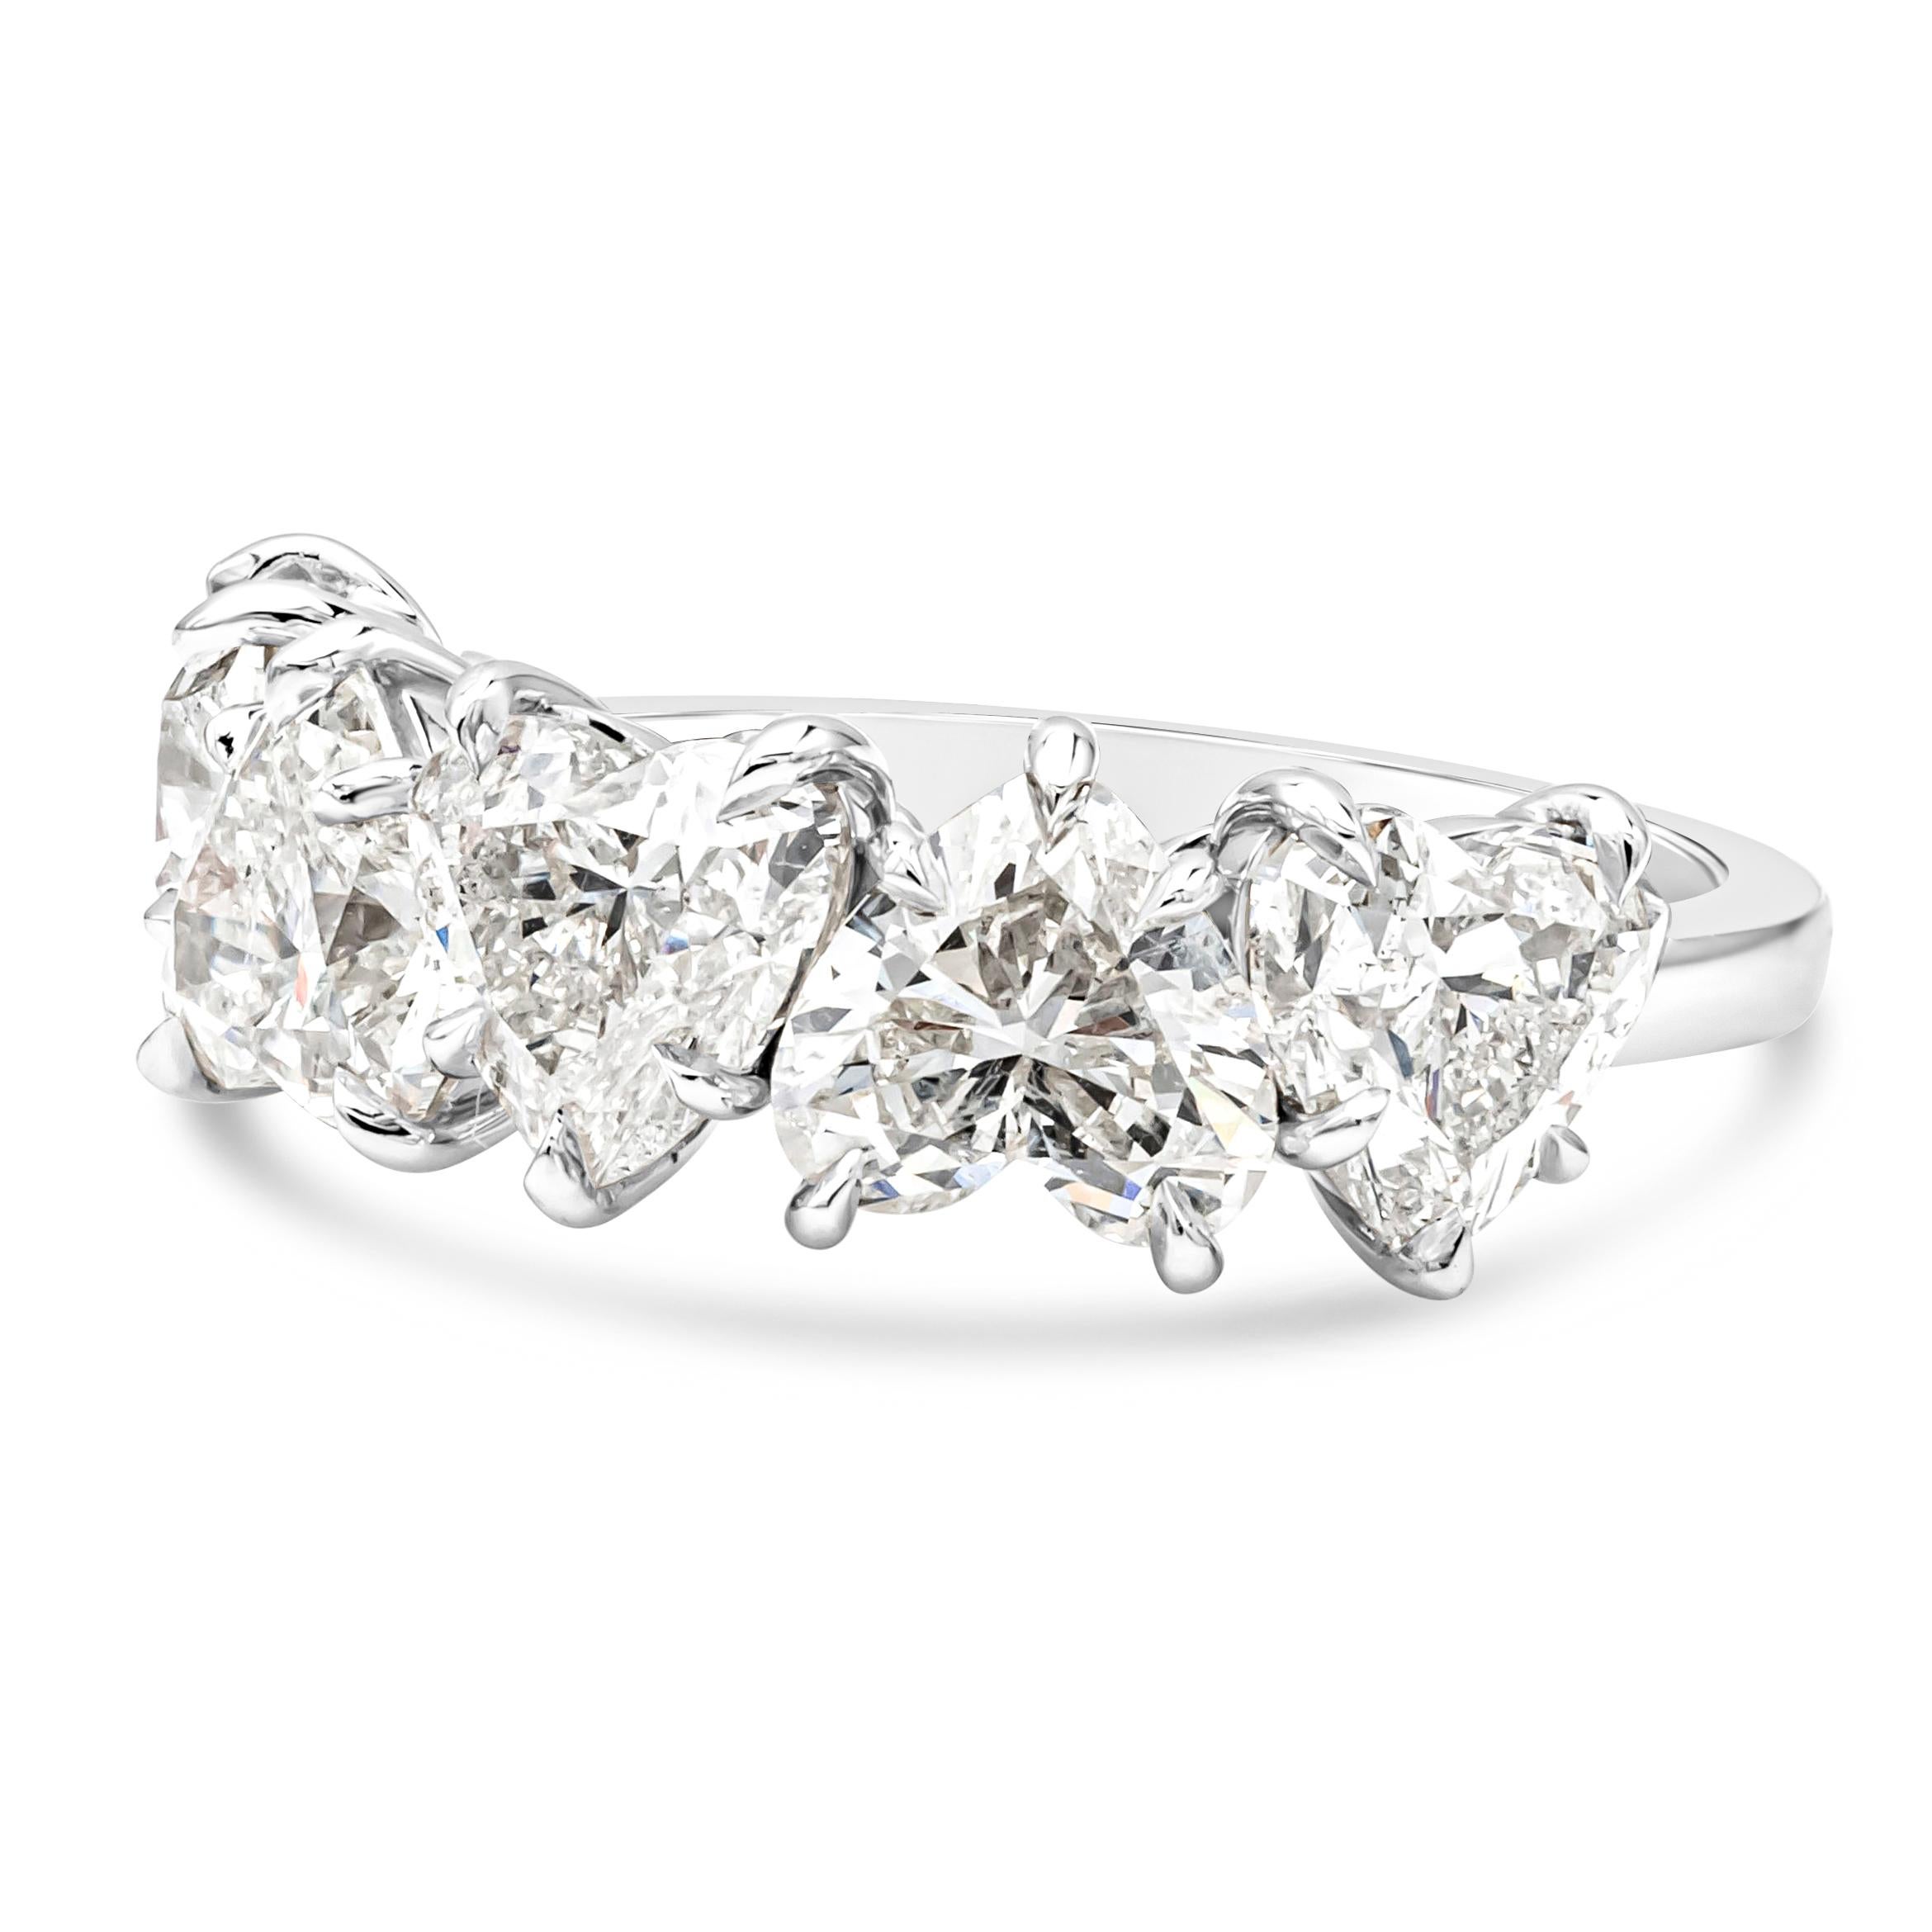 A classic and beautiful five-stone wedding band showcasing five brilliant heart shape diamonds weighing 5.31 carats total certified by GIA as H-J color and SI2-I1 in clarity, set in a timeless five prong basket setting. Finely made in Platinum and